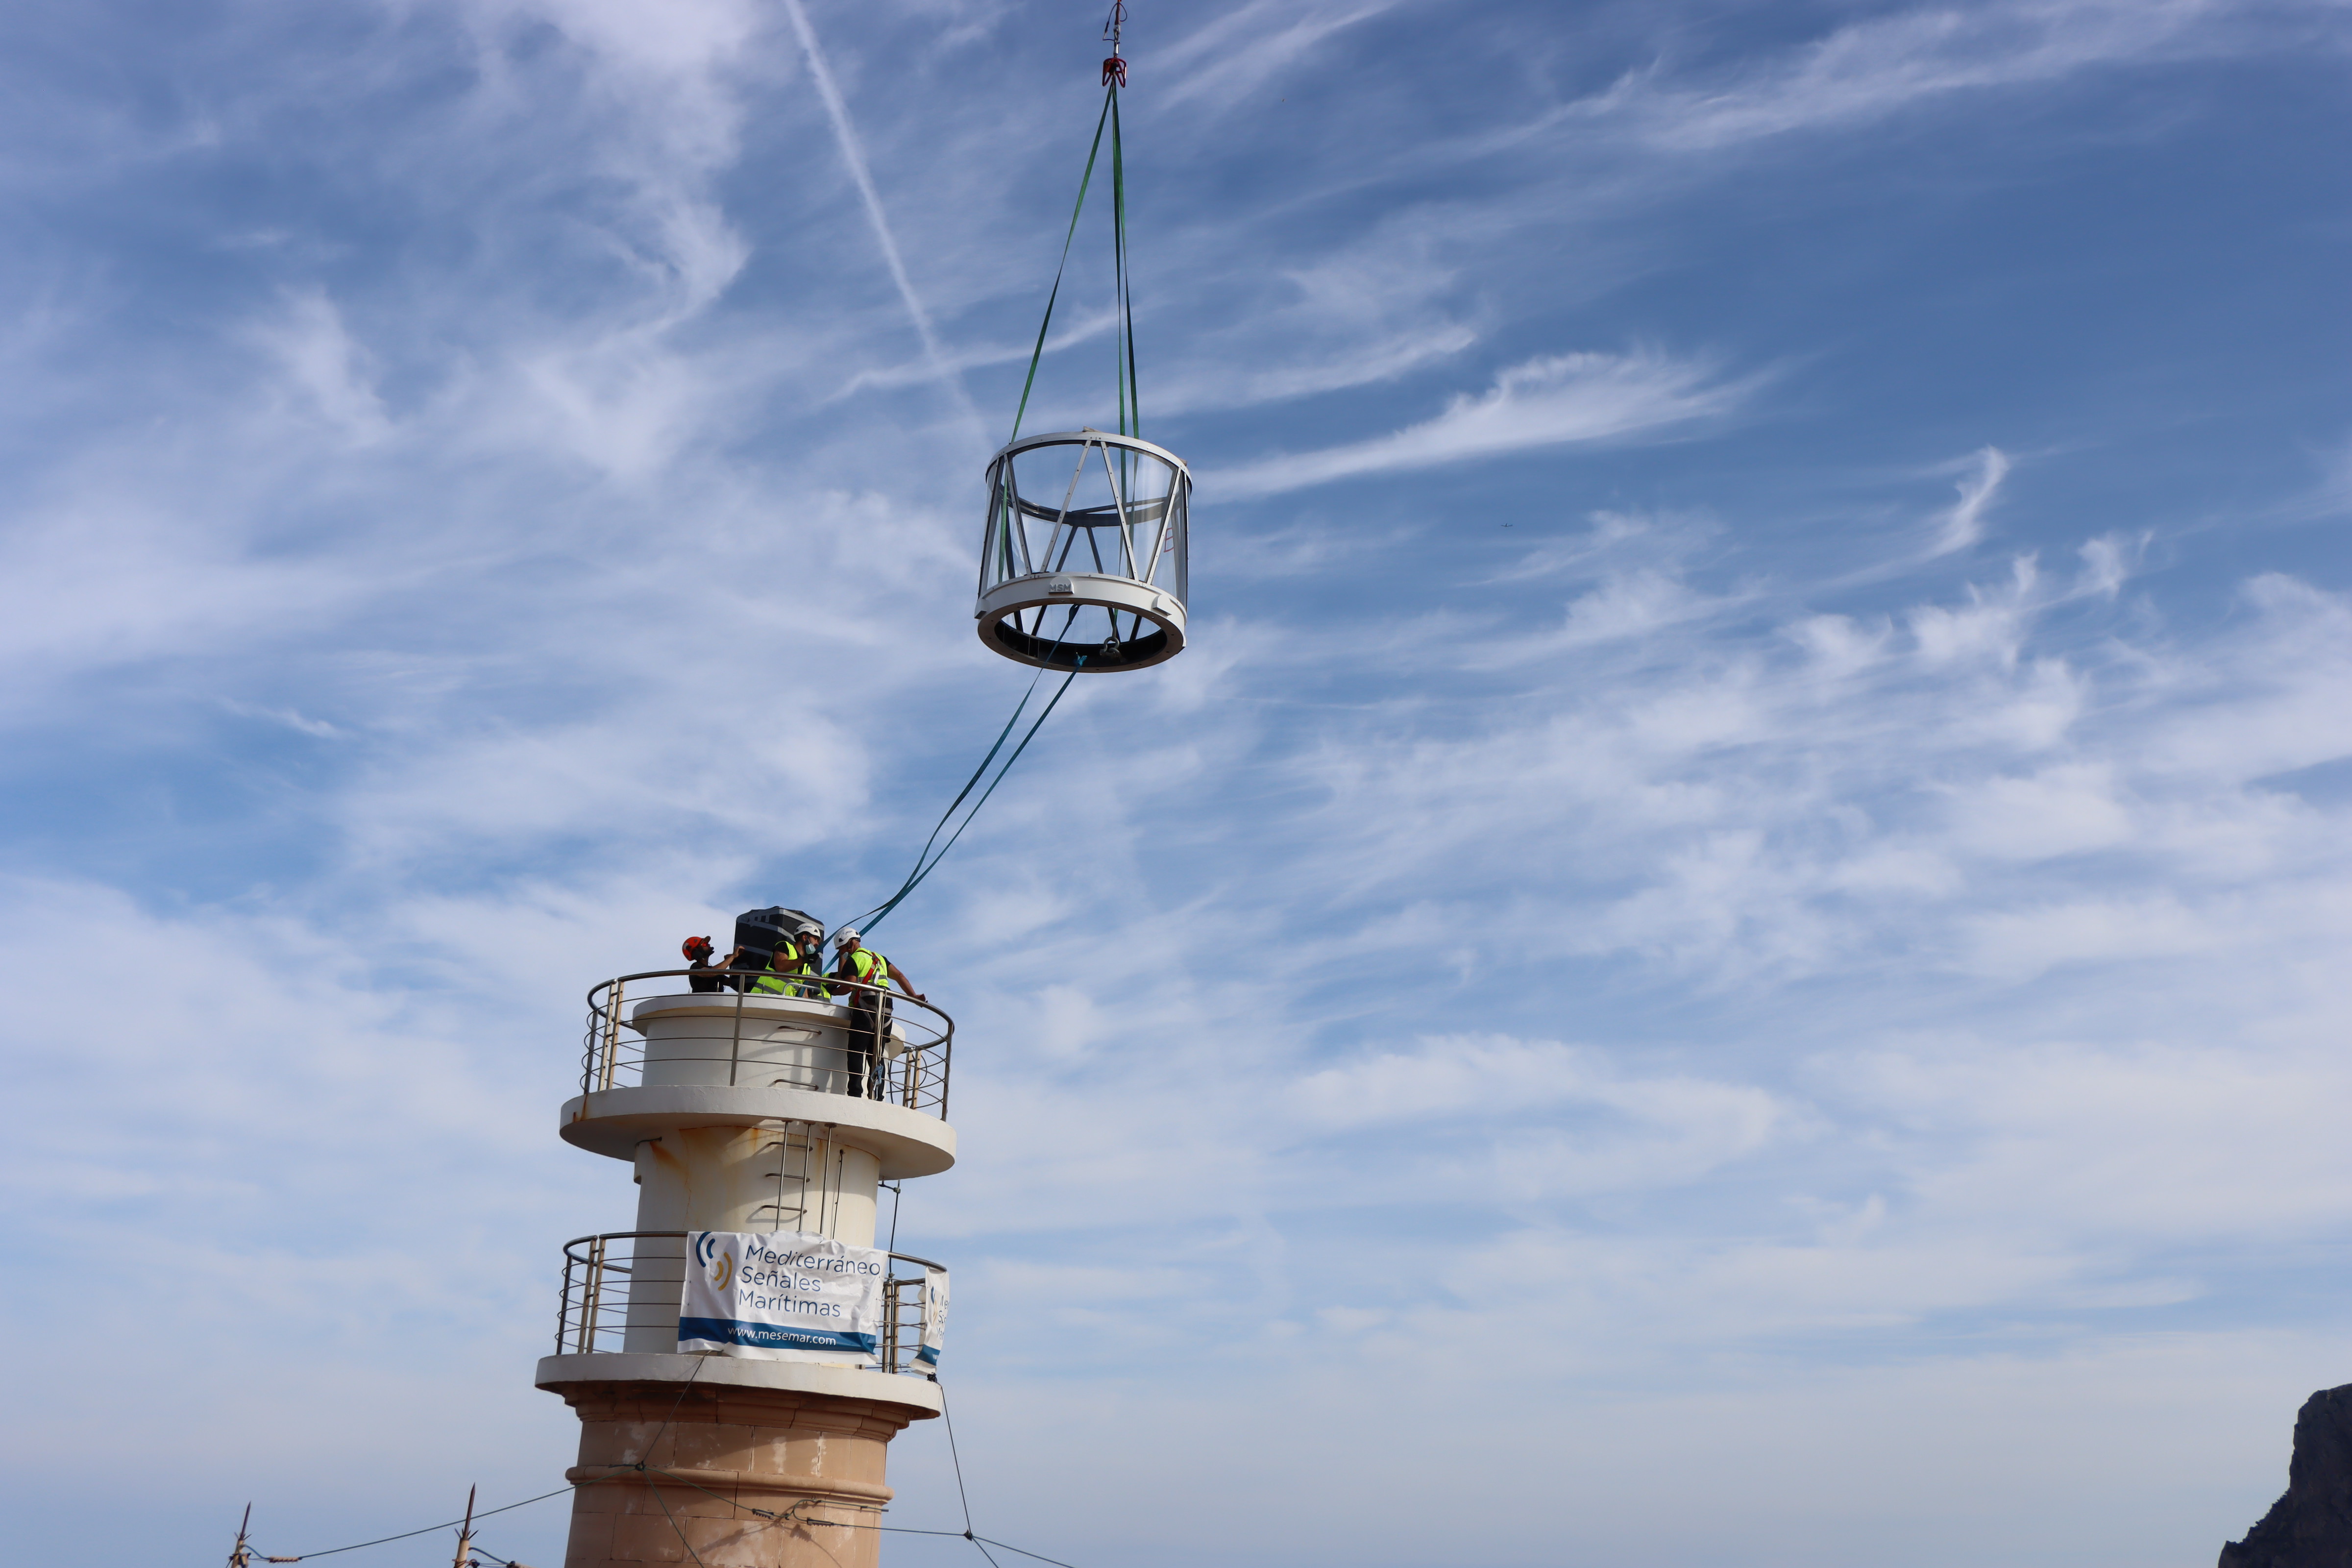 The light of the Tramuntana lighthouse on the island of Dragonera has been replaced